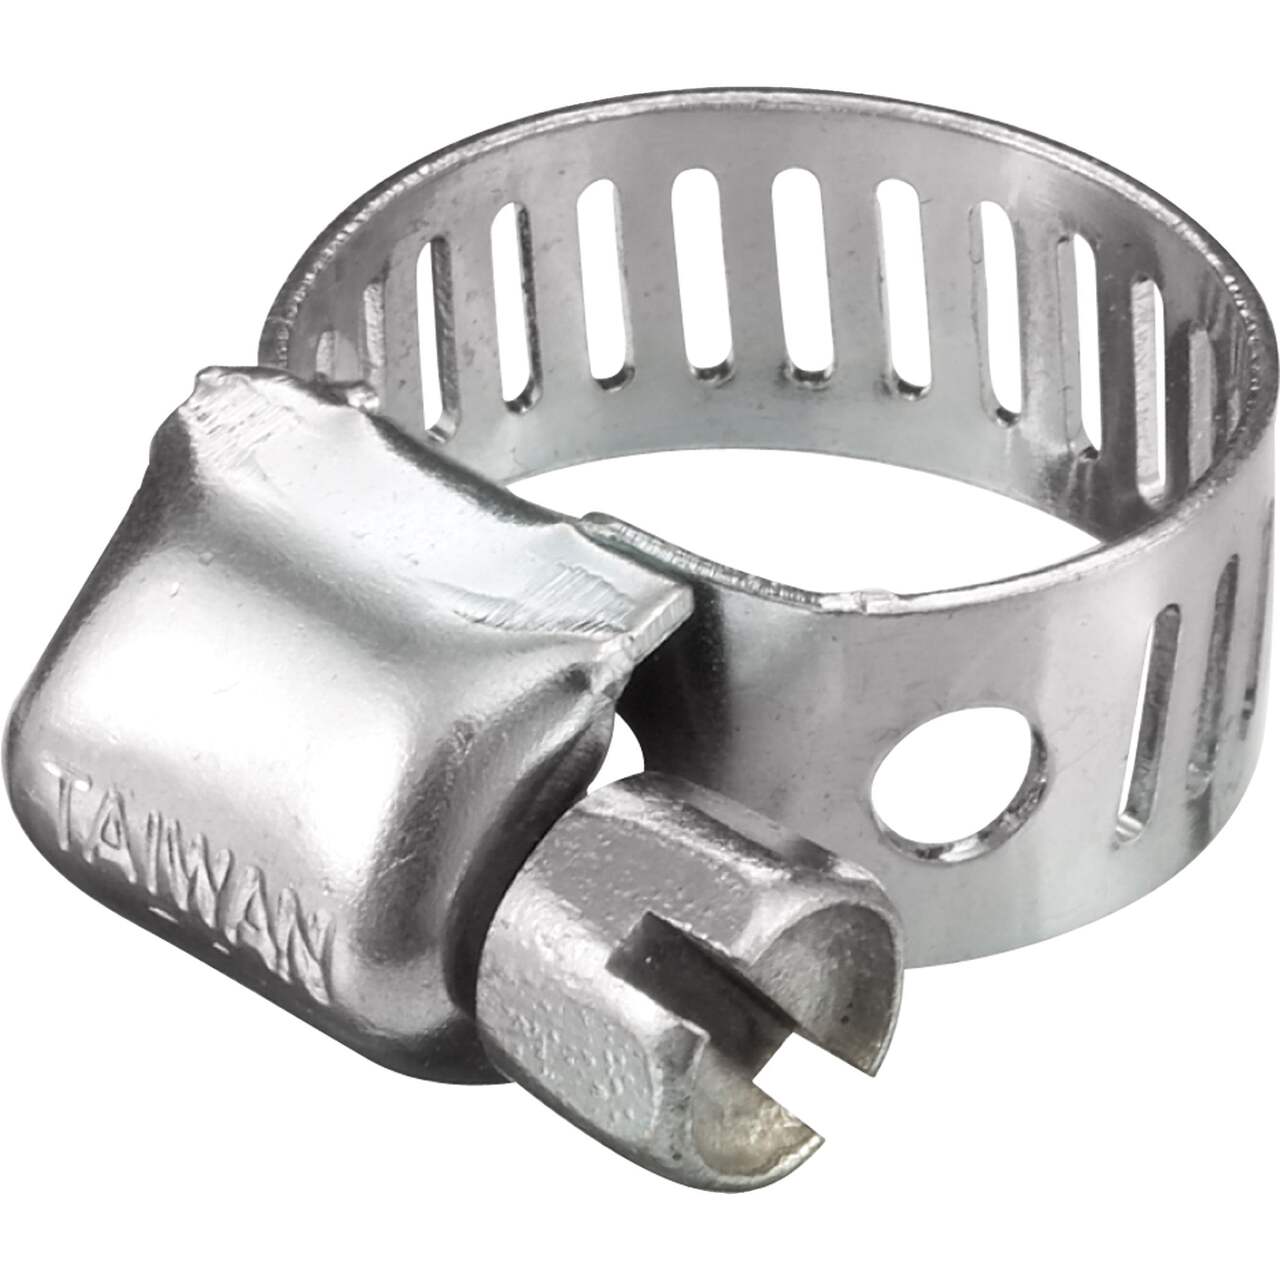 PlumbShop Metal Gear Clamp for Hose Fitting, 3-9/16 to 4-1/2-in